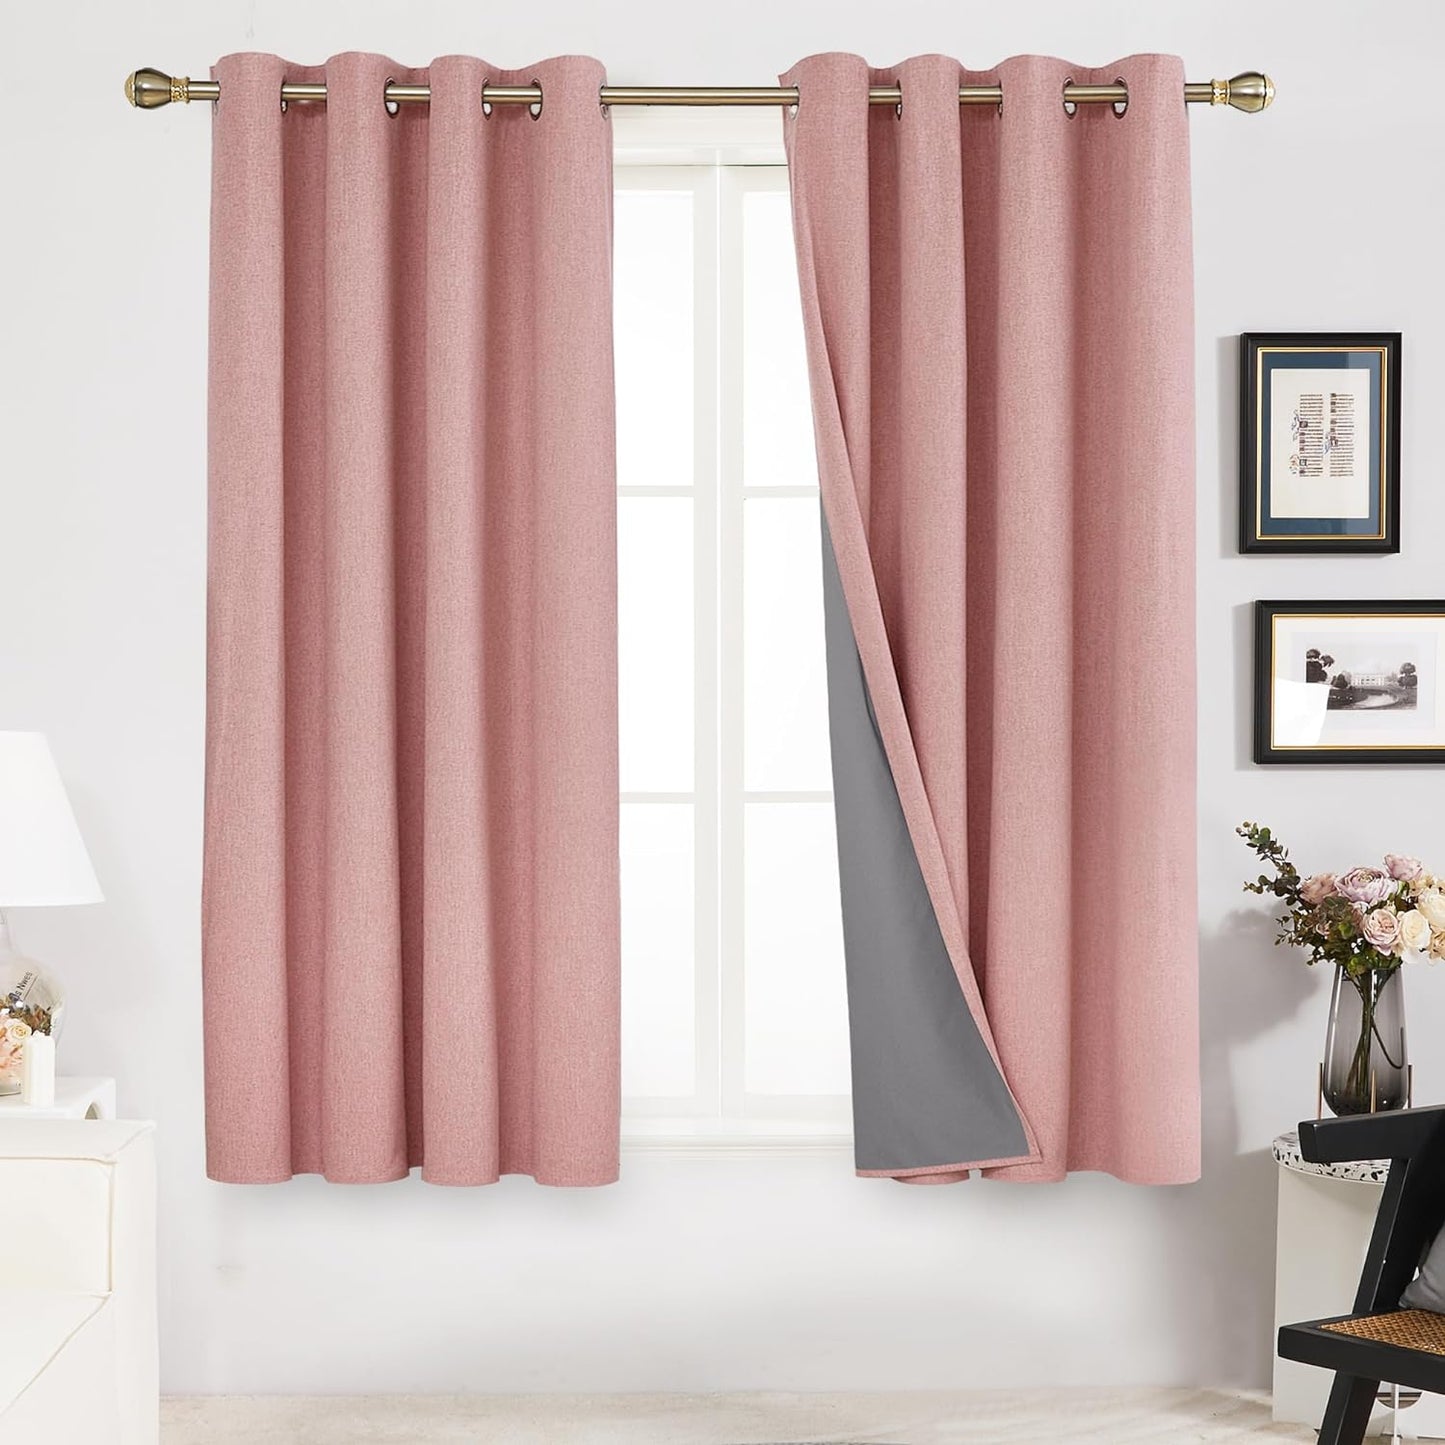 Deconovo Linen Blackout Curtains 84 Inch Length Set of 2, Thermal Curtain Drapes with Grey Coating, Total Light Blocking Waterproof Curtains for Indoor/Outdoor (Light Grey, 52W X 84L Inch)  Deconovo Coral Pink 52X45 Inches 